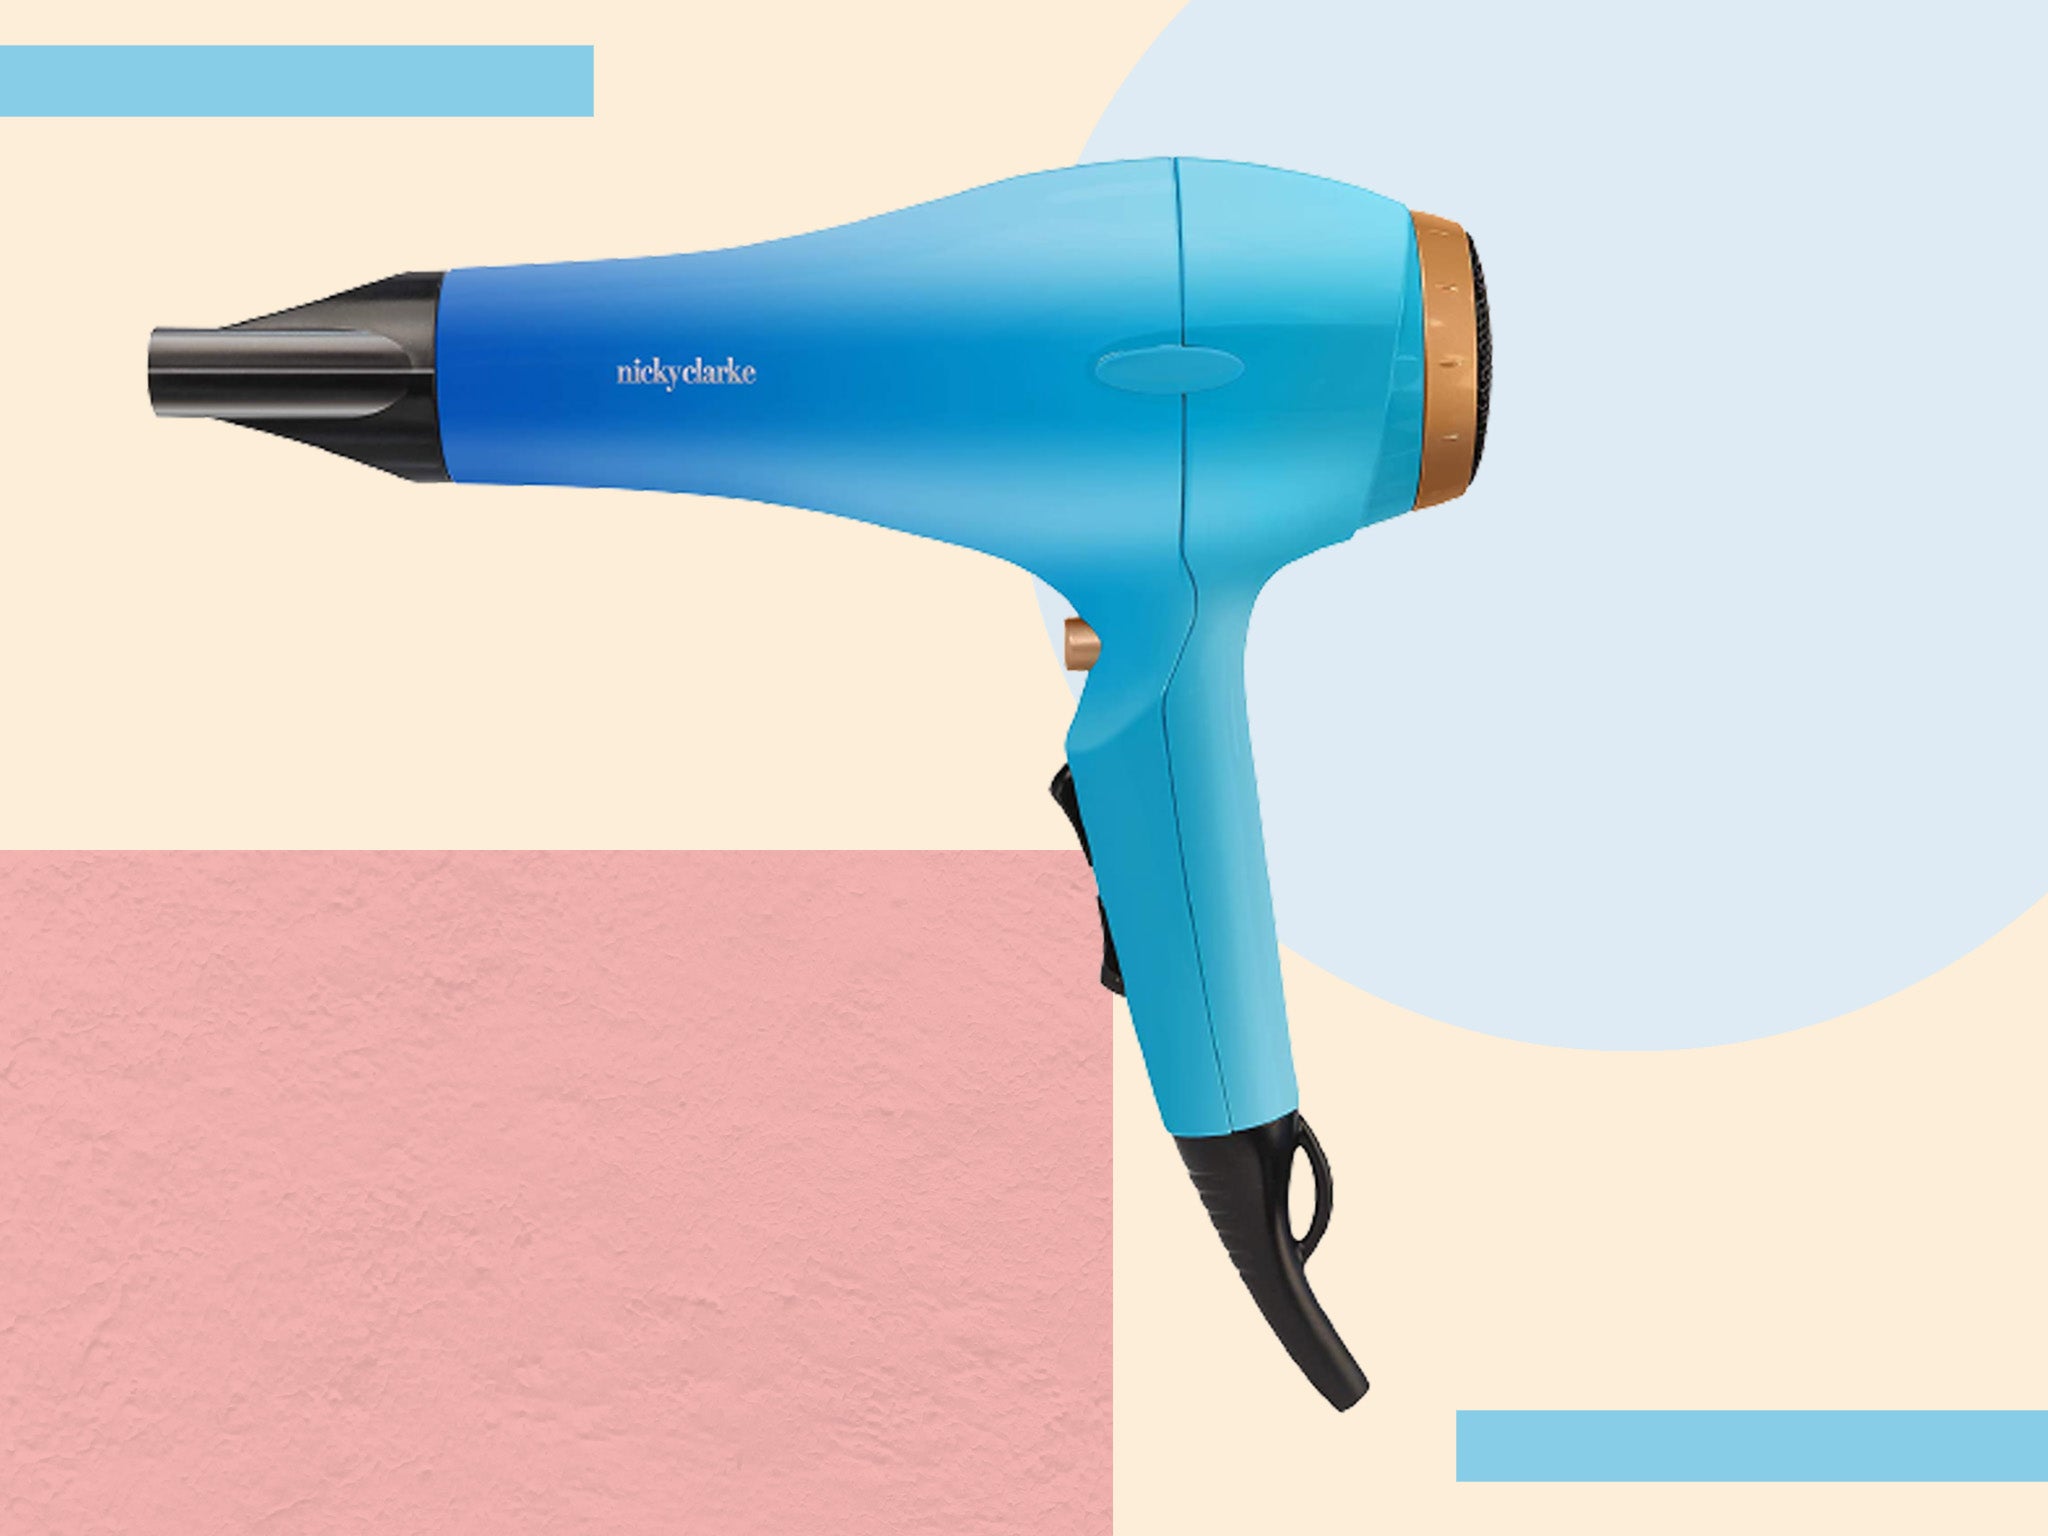 There are fewer settings and modes on this hair dryer than most – but that’s not a bad thing